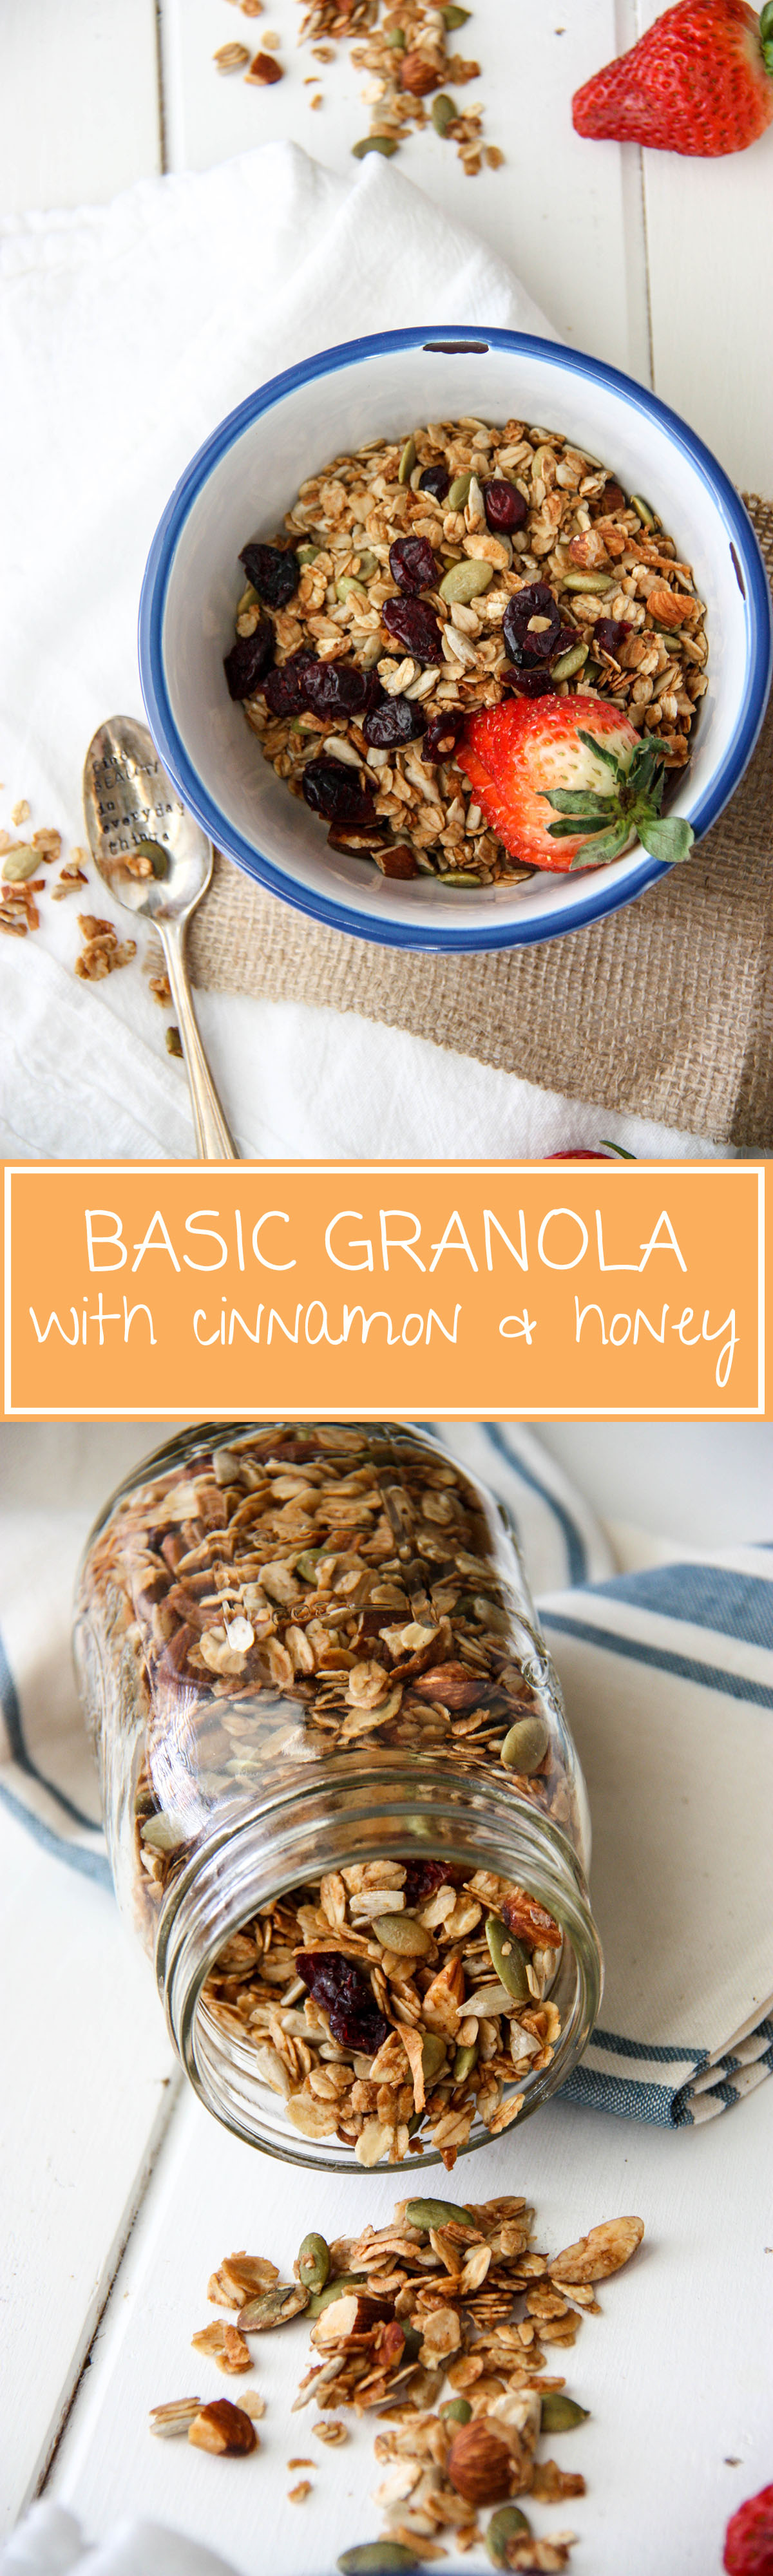 Basic Granola with Cinnamon & Honey www.thehomecookskitchen.com - try this easy, healthy breakfast for busy people